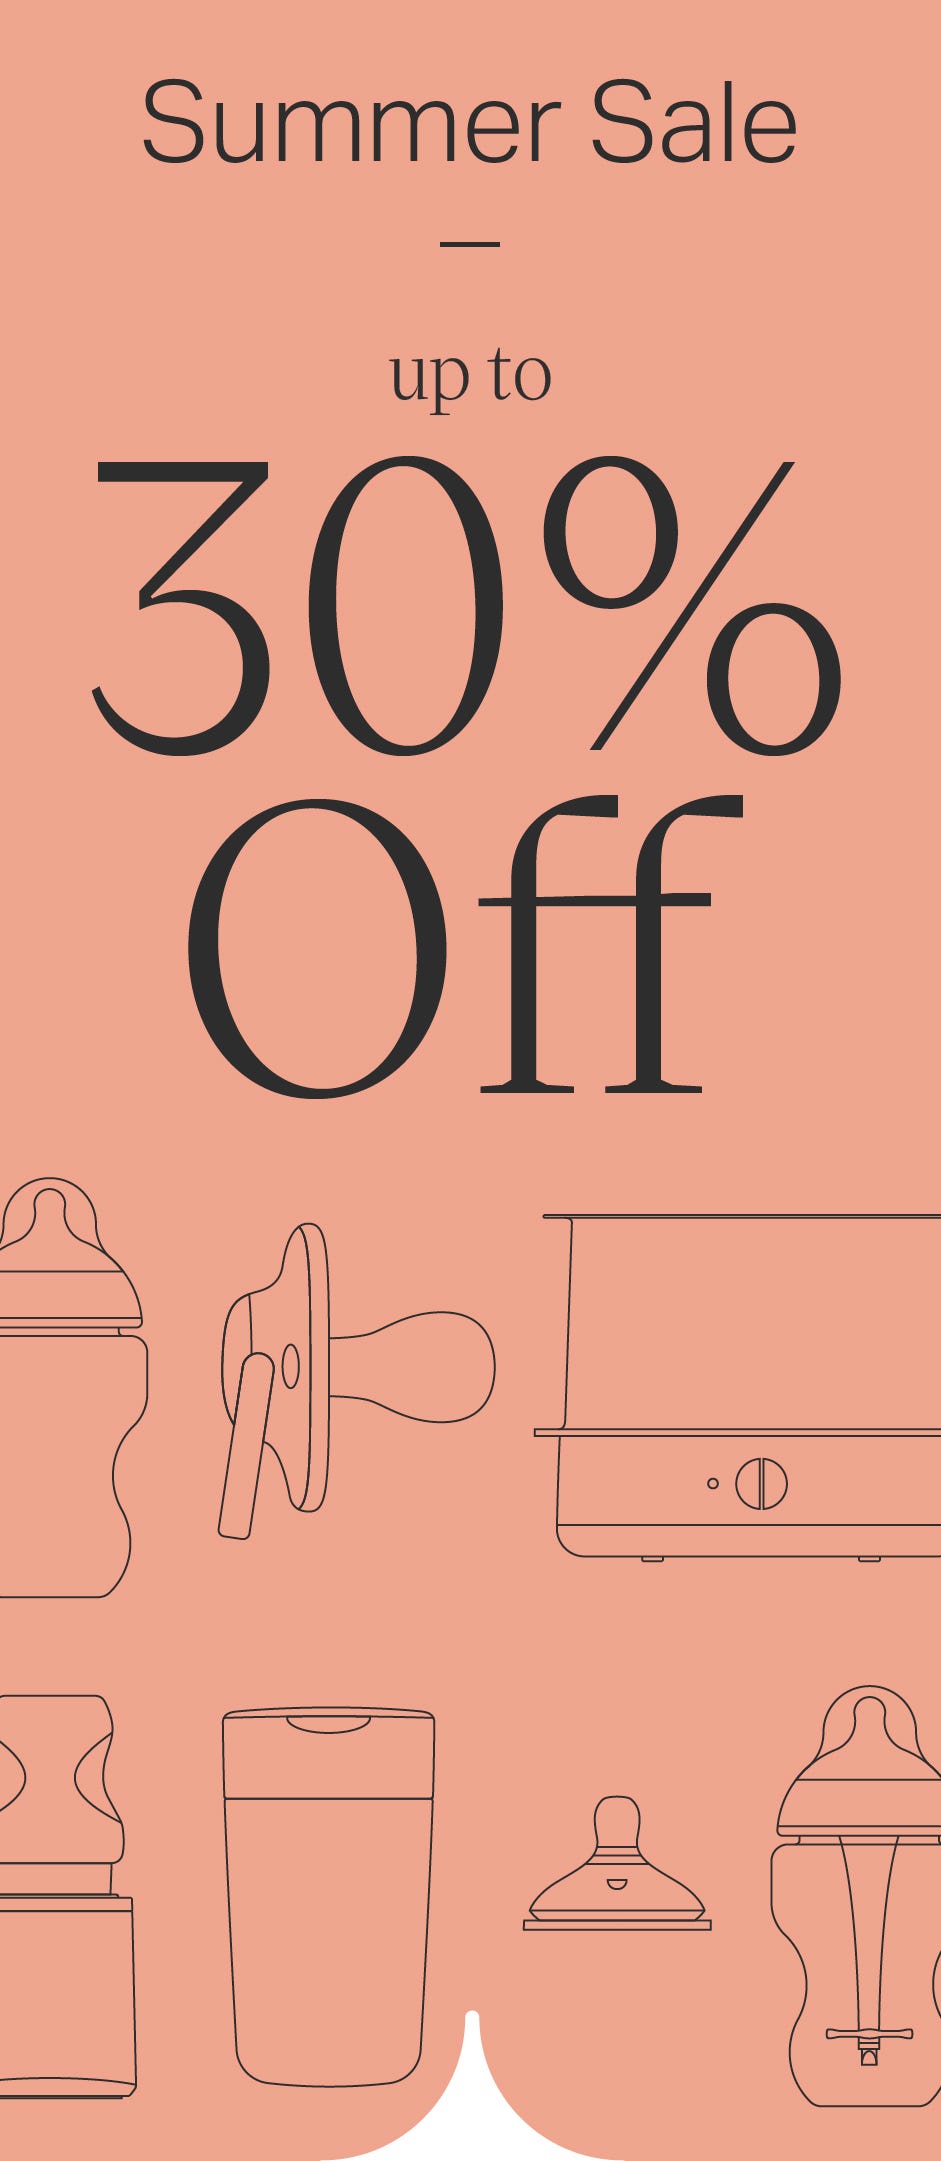 Summer sale up to 30% off